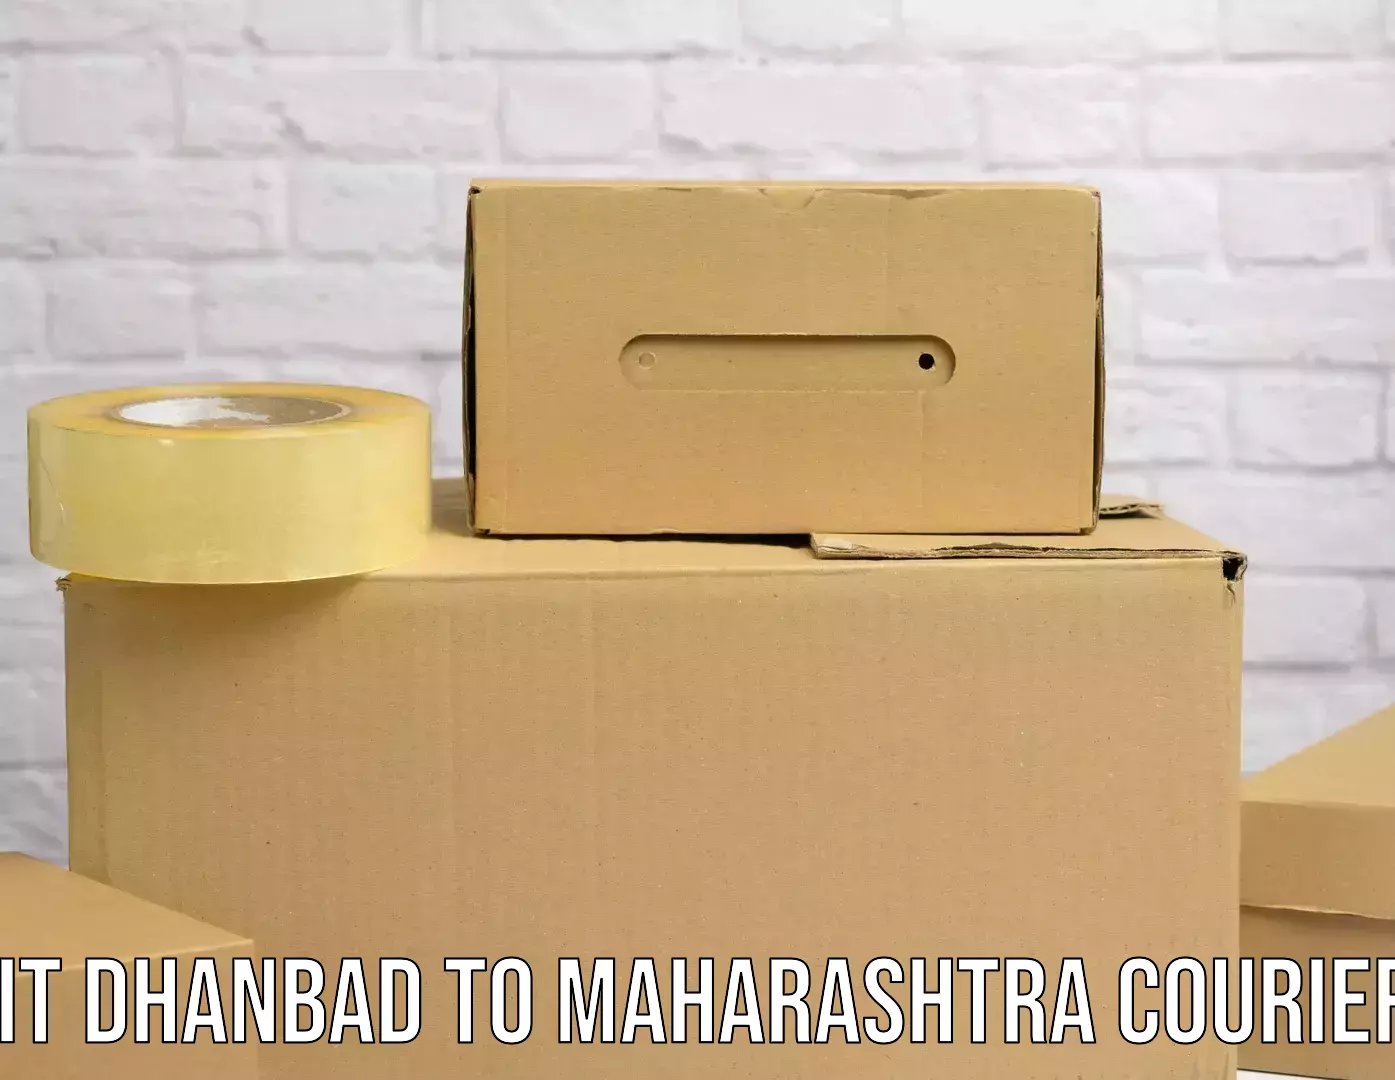 Personal courier services IIT Dhanbad to Igatpuri